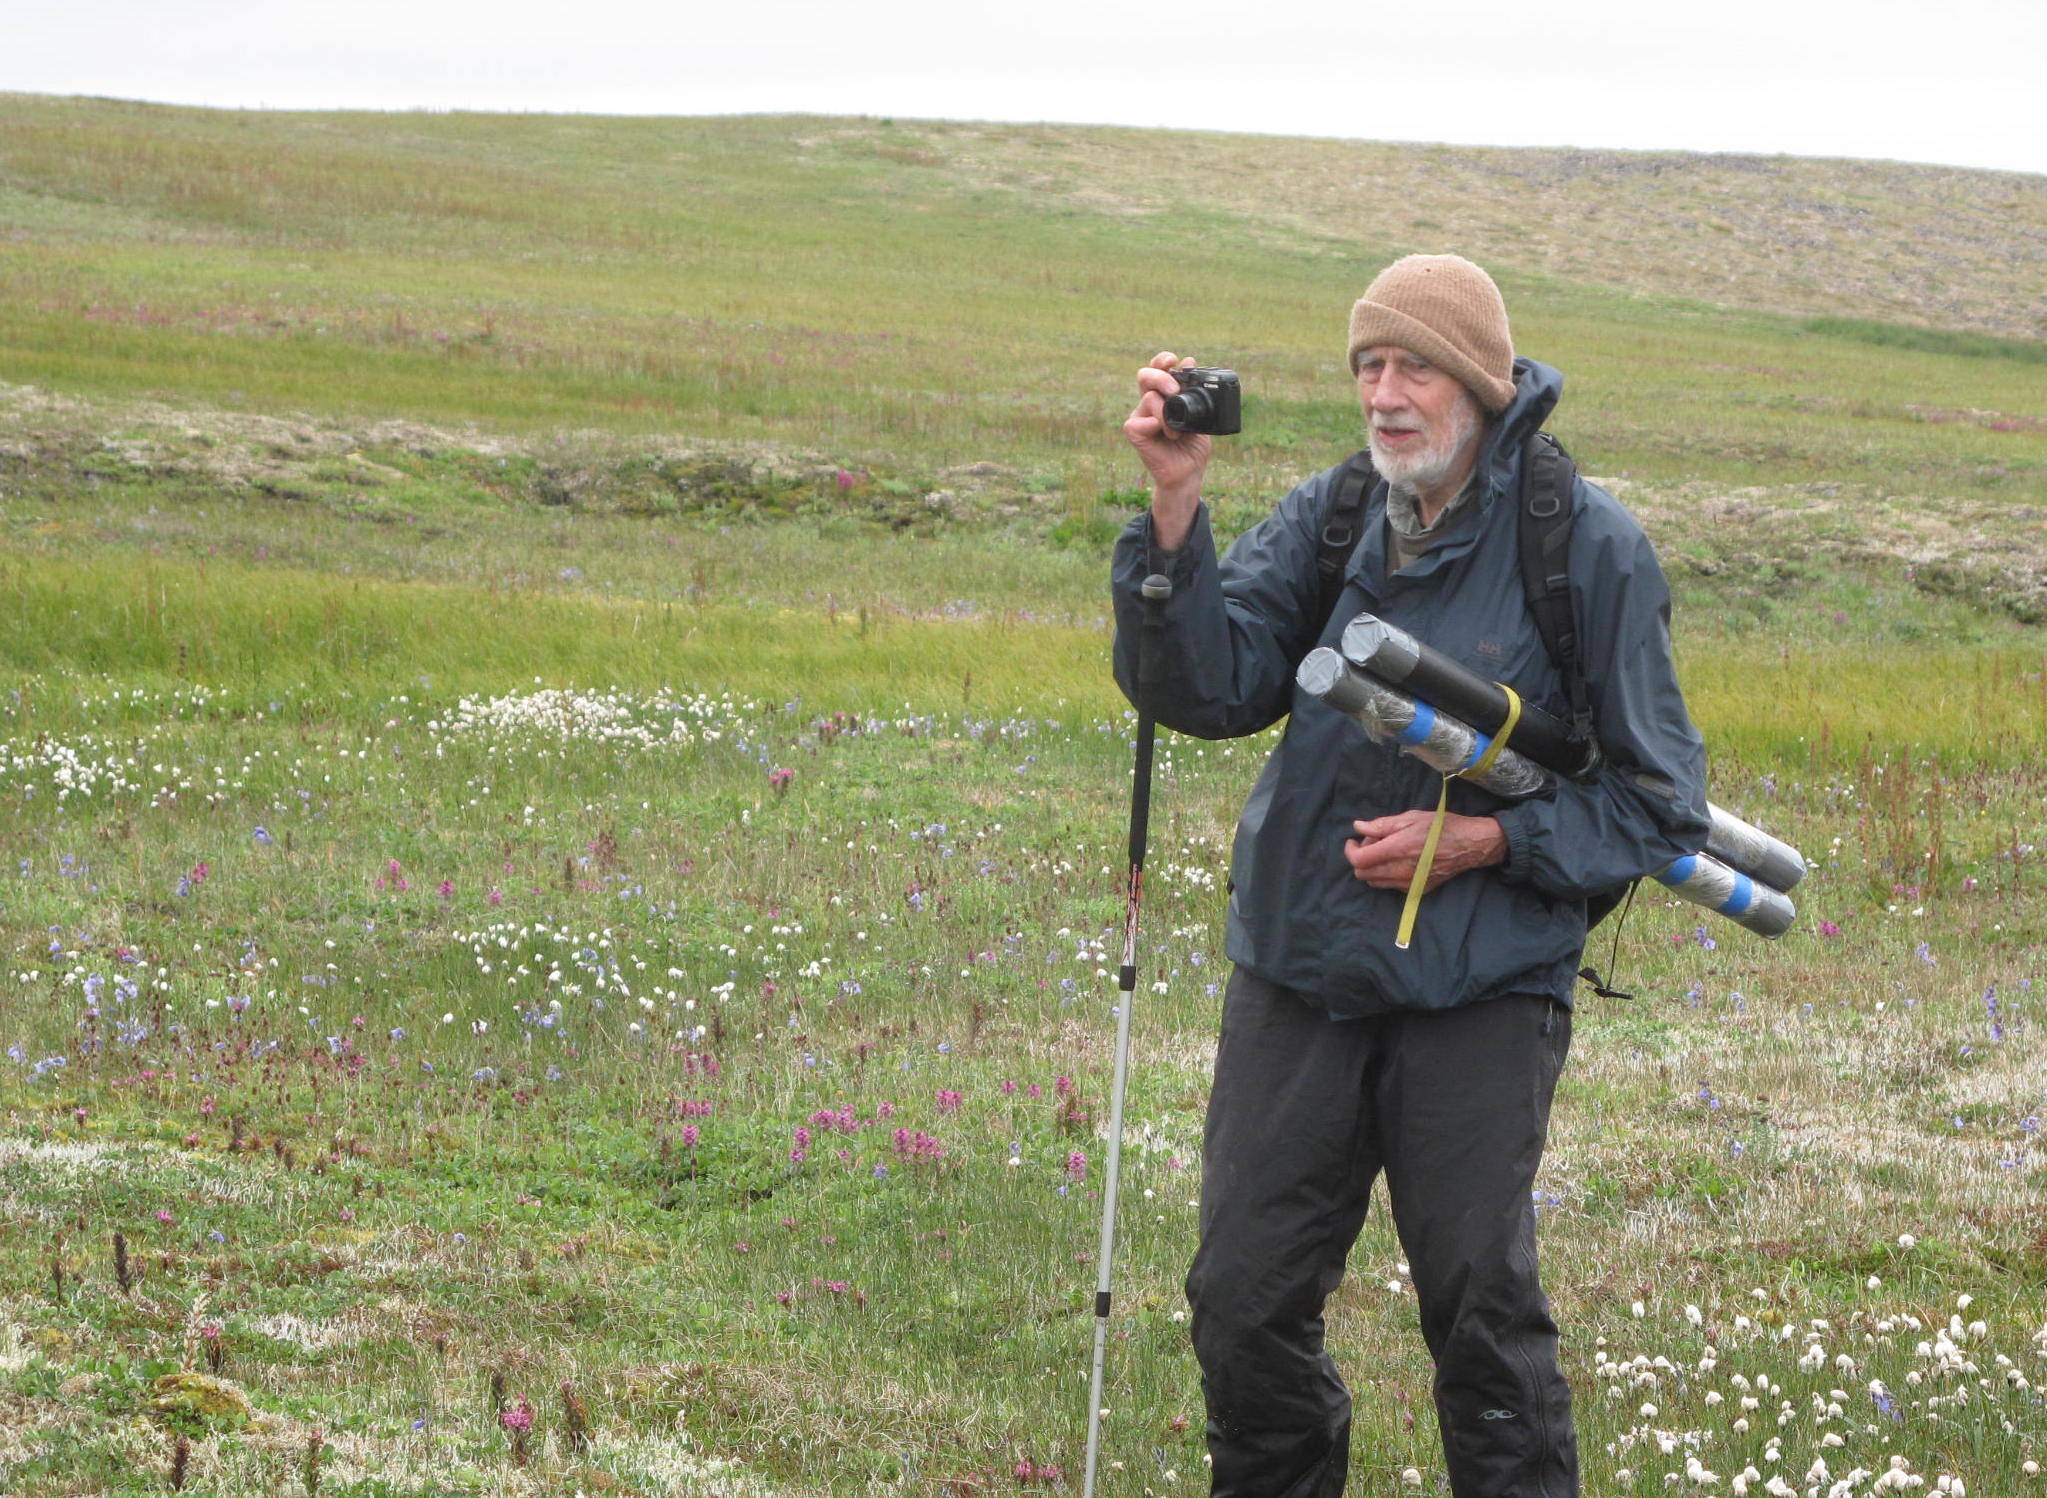 In August 2012, David Klein, then 85, carried sediment cores within plastic pipes over the surface of St. Matthew Island. (Courtesy Photo / Ned Rozell)